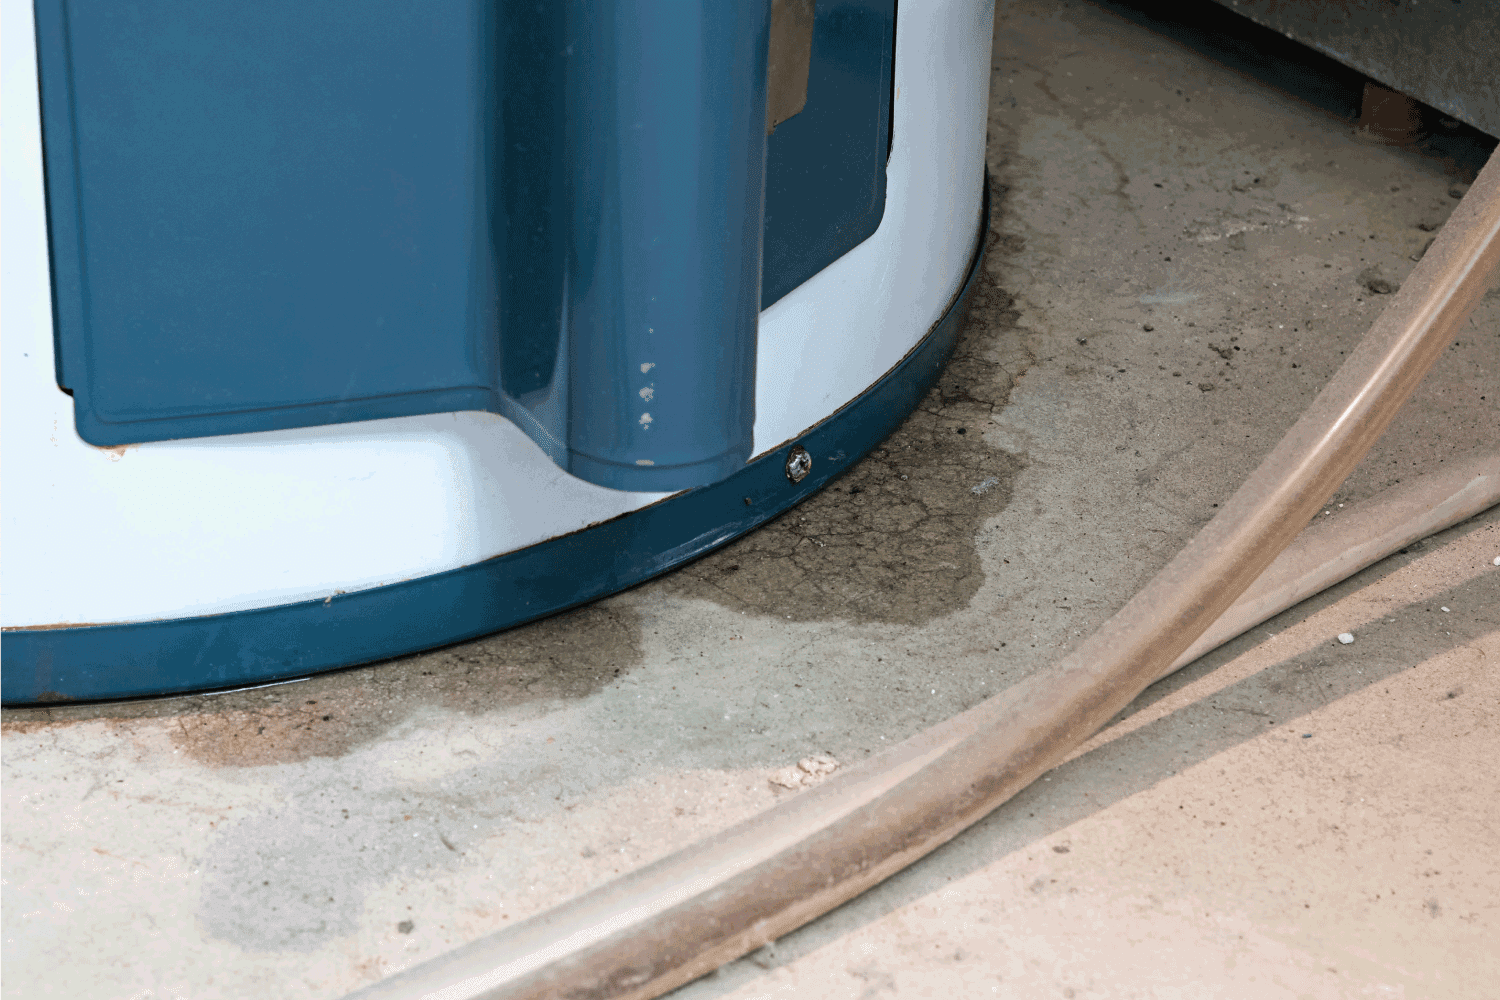 Water underneath a water heater shows the beginning of a leak, also shown by the signs of rust around the bottom rim